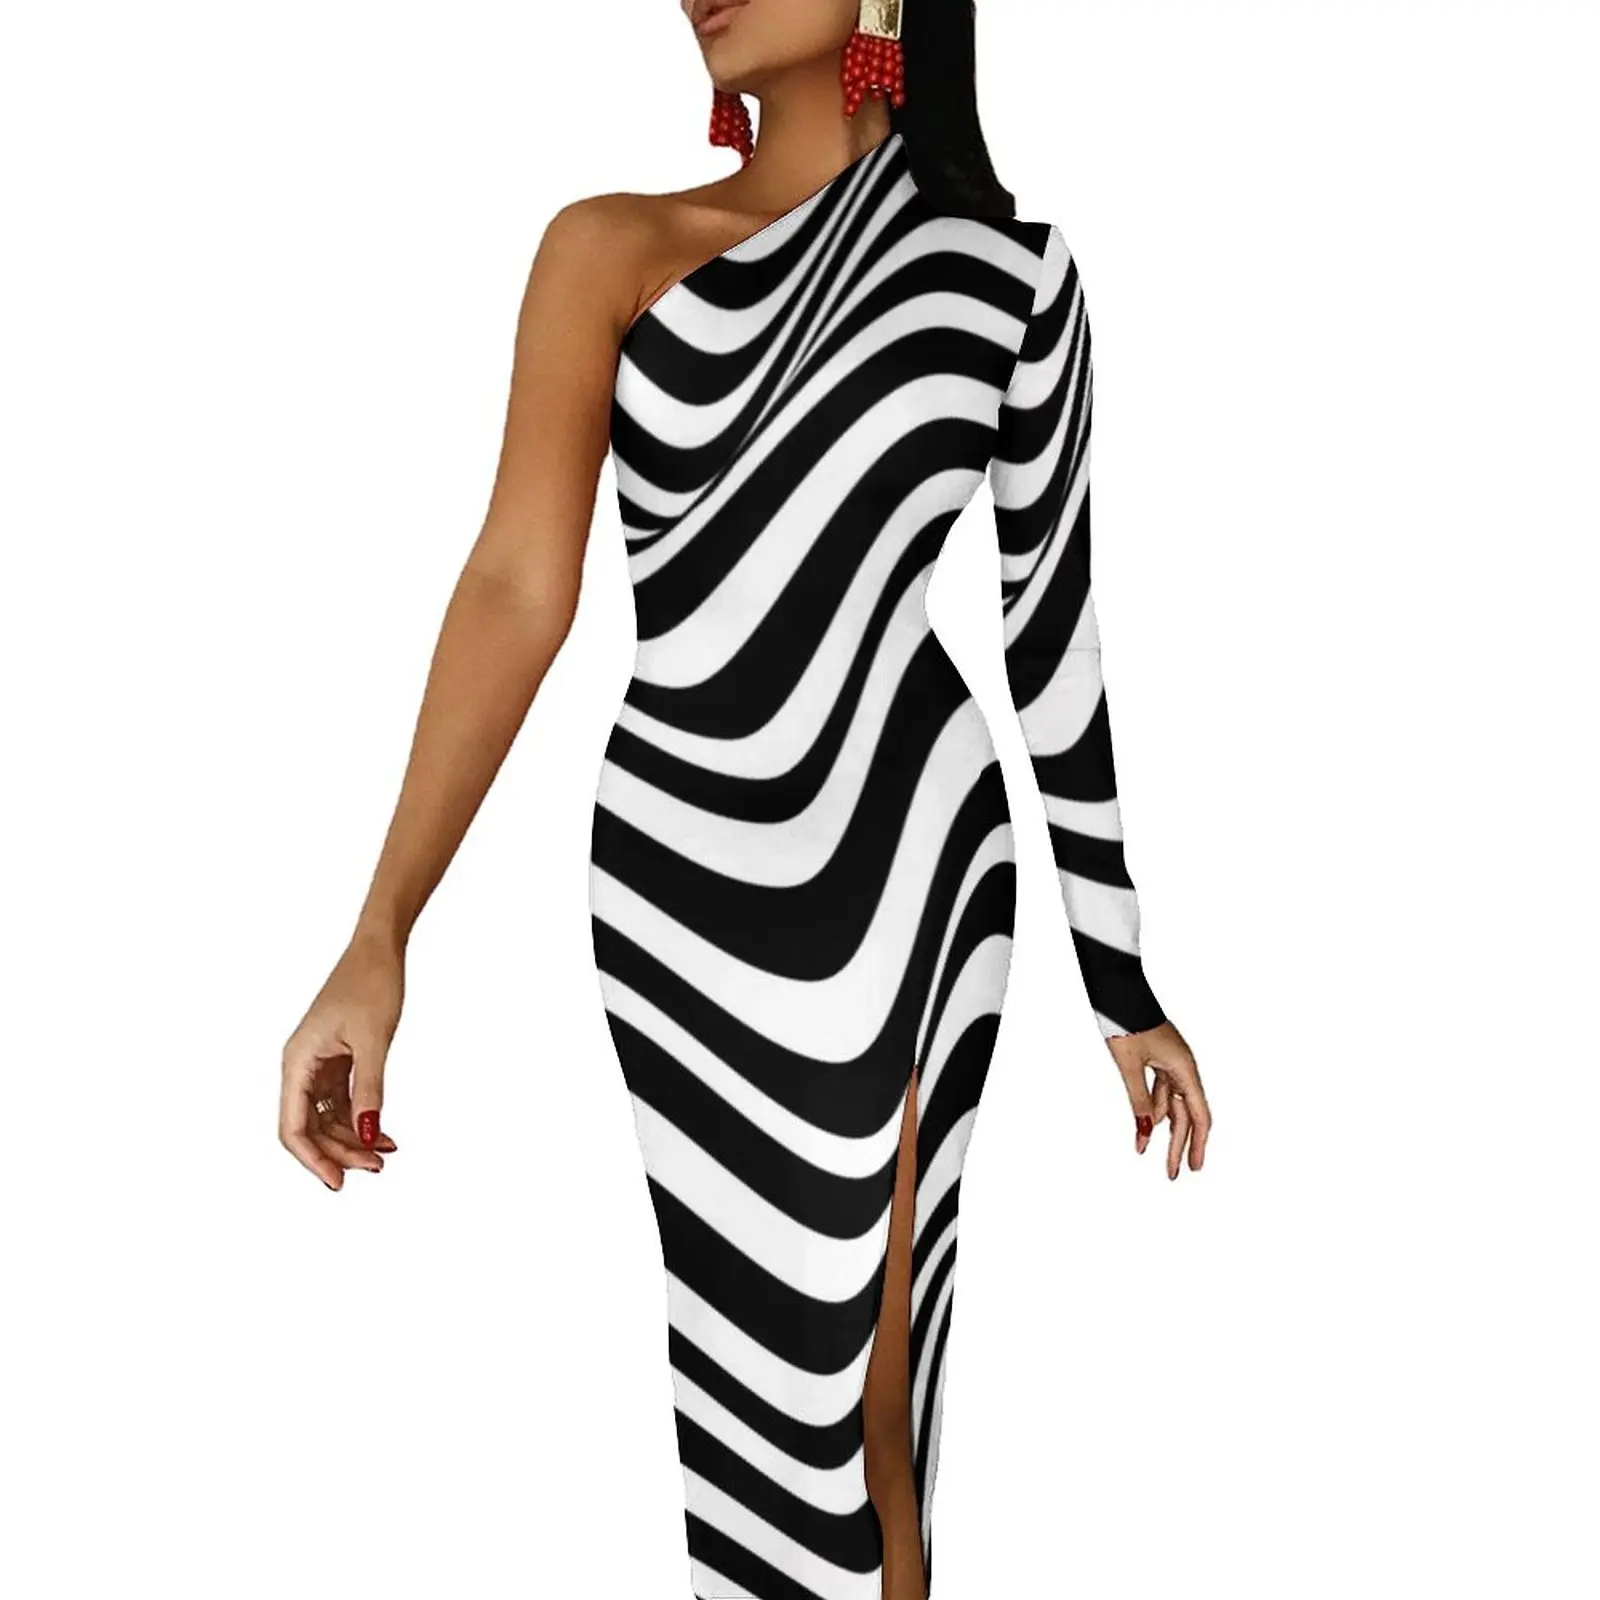 Abstract Stripped Design Bodycon Dress Womens Black White Stripes Club Maxi Dress Autumn Long Sleeve Streetwear Graphic Dresses